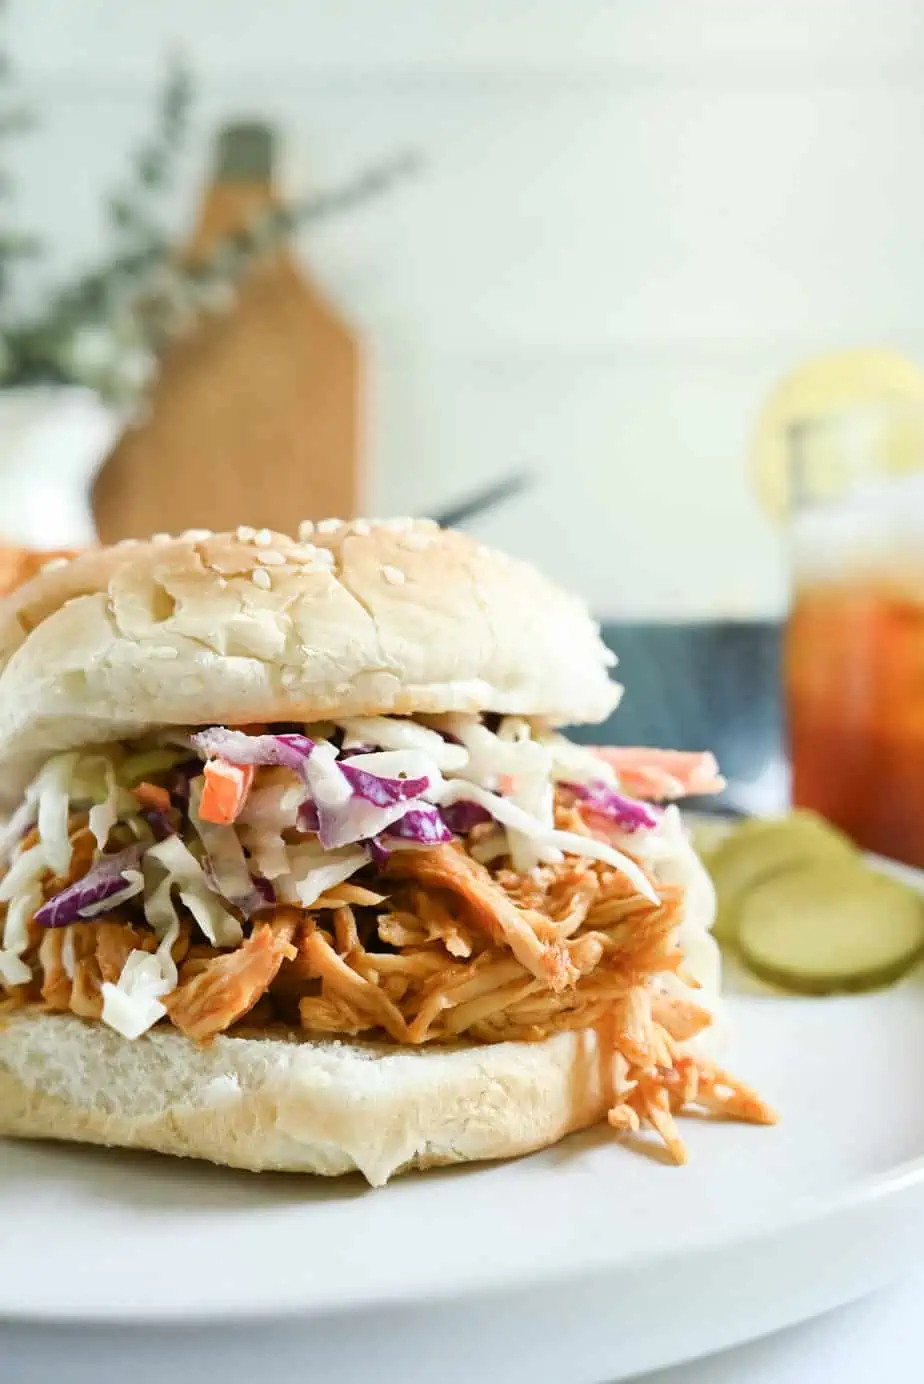 Bun piled high with crockpot pulled chicken and coleslaw and set on a white plate.